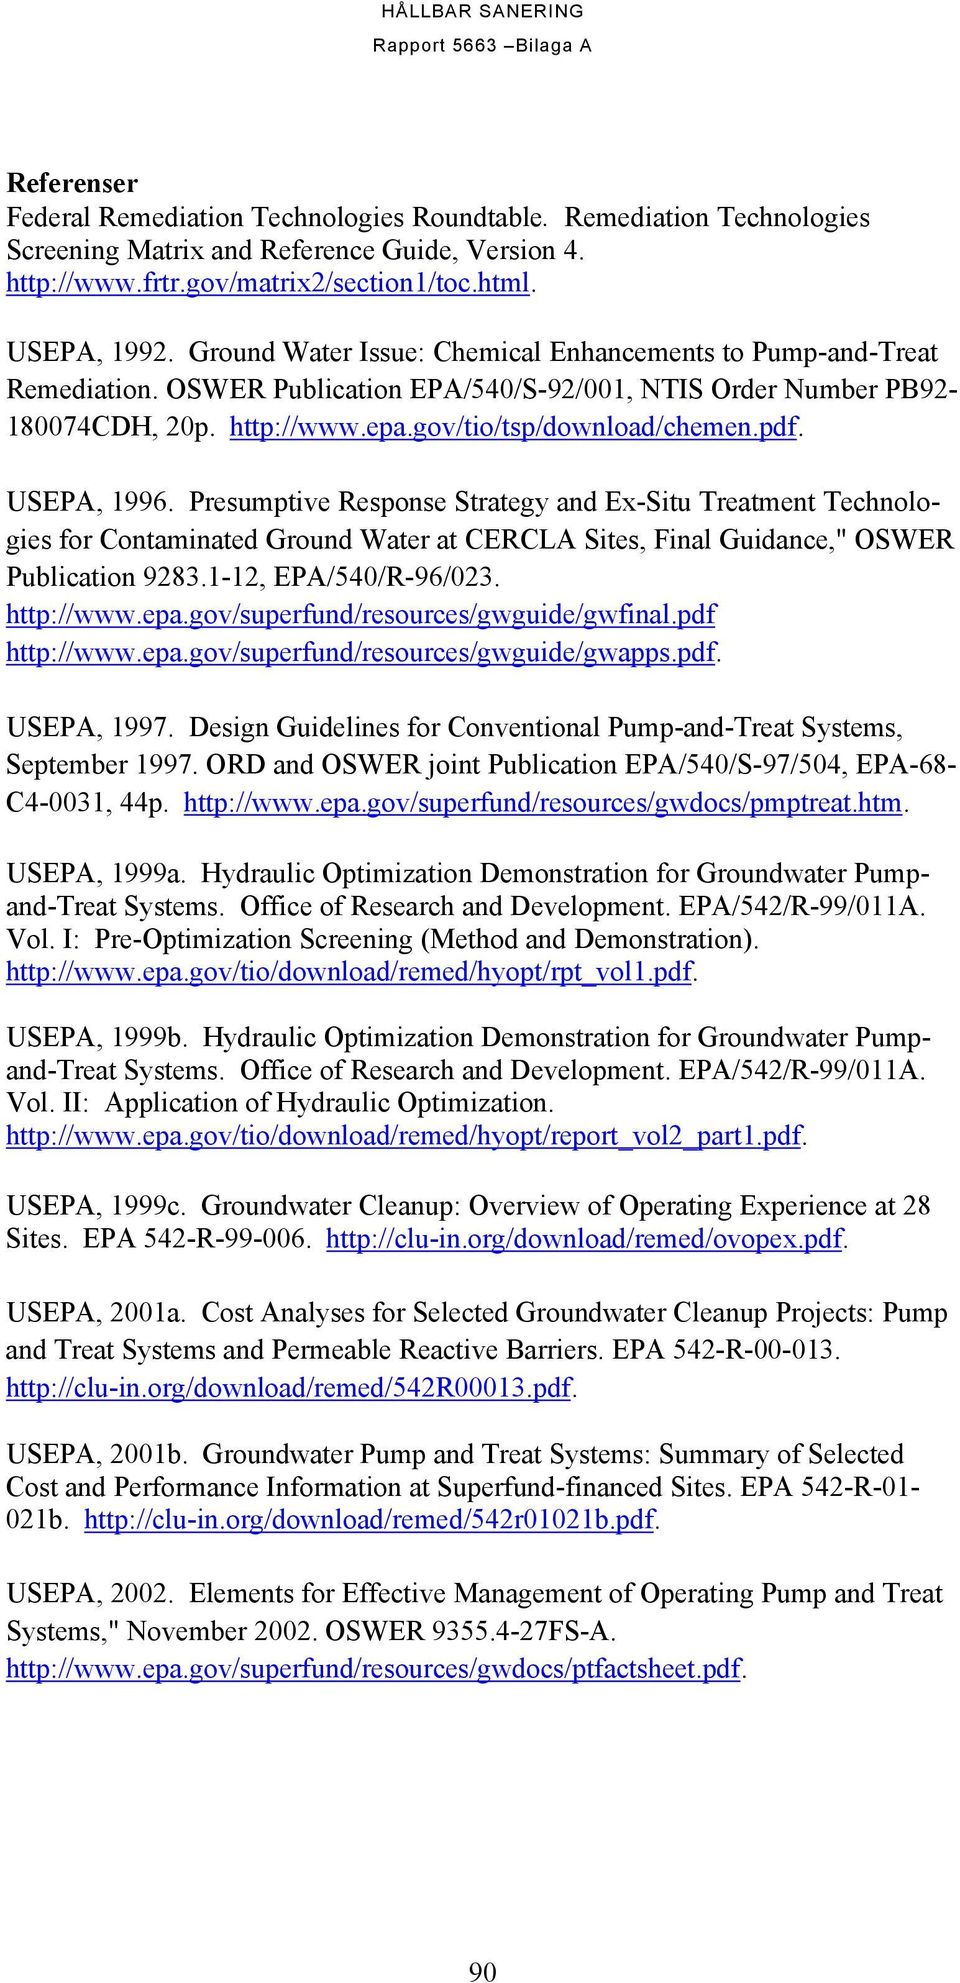 USEPA, 1996. Presumptive Response Strategy and Ex-Situ Treatment Technologies for Contaminated Ground Water at CERCLA Sites, Final Guidance," OSWER Publication 9283.1-12, EPA/540/R-96/023. http://www.